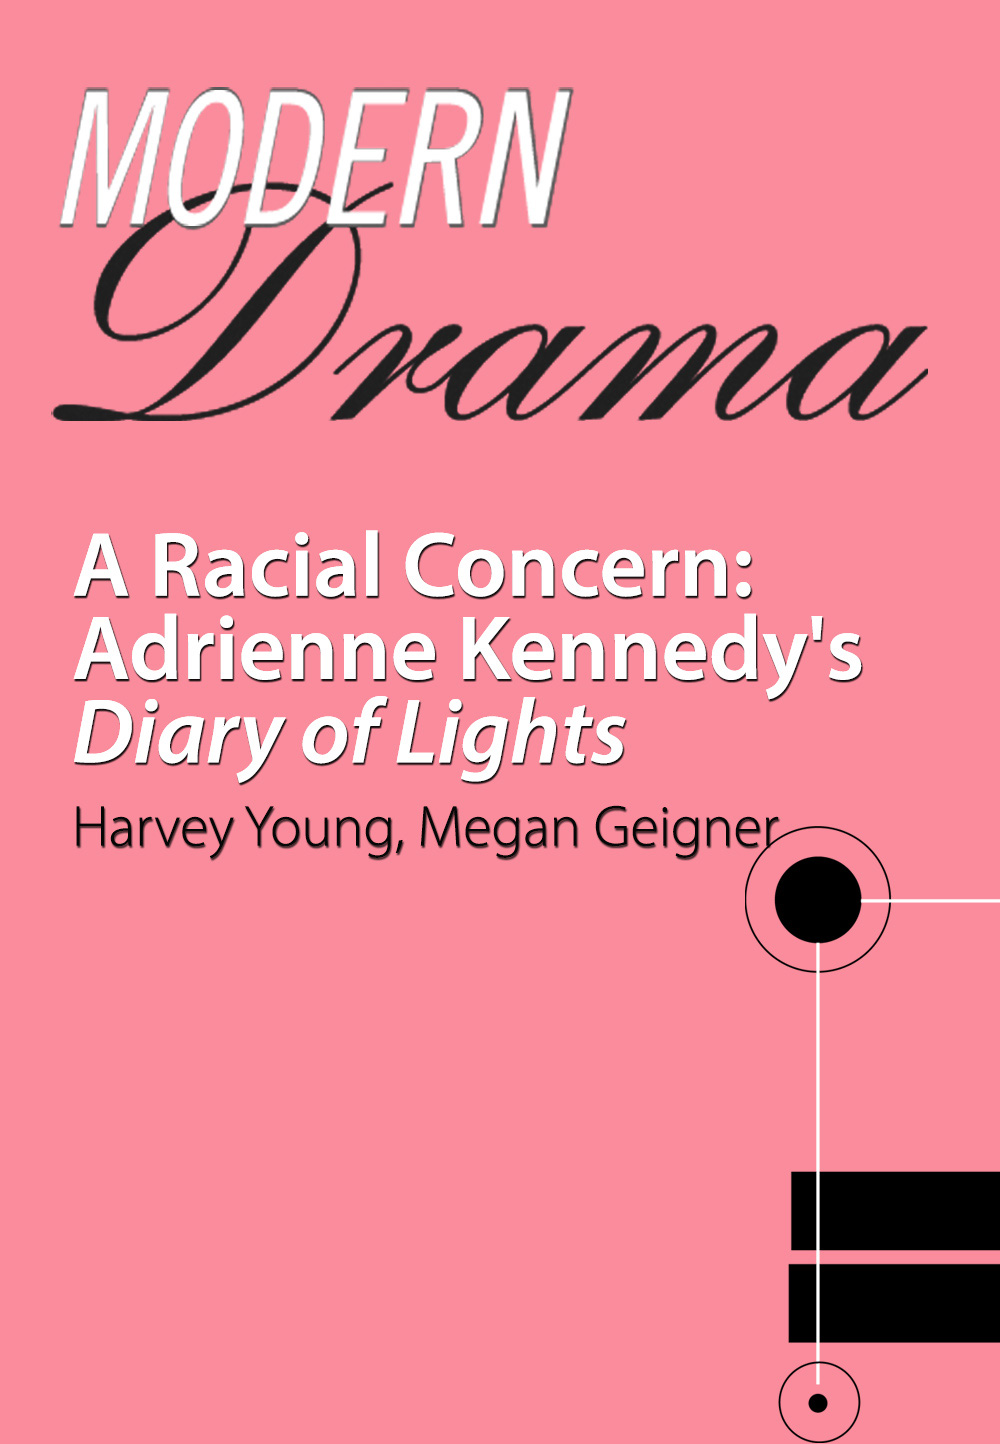 A Racial Concern: Adrienne Kennedy's Diary of Lights, Vol. 55, No. 1, Spring 2012